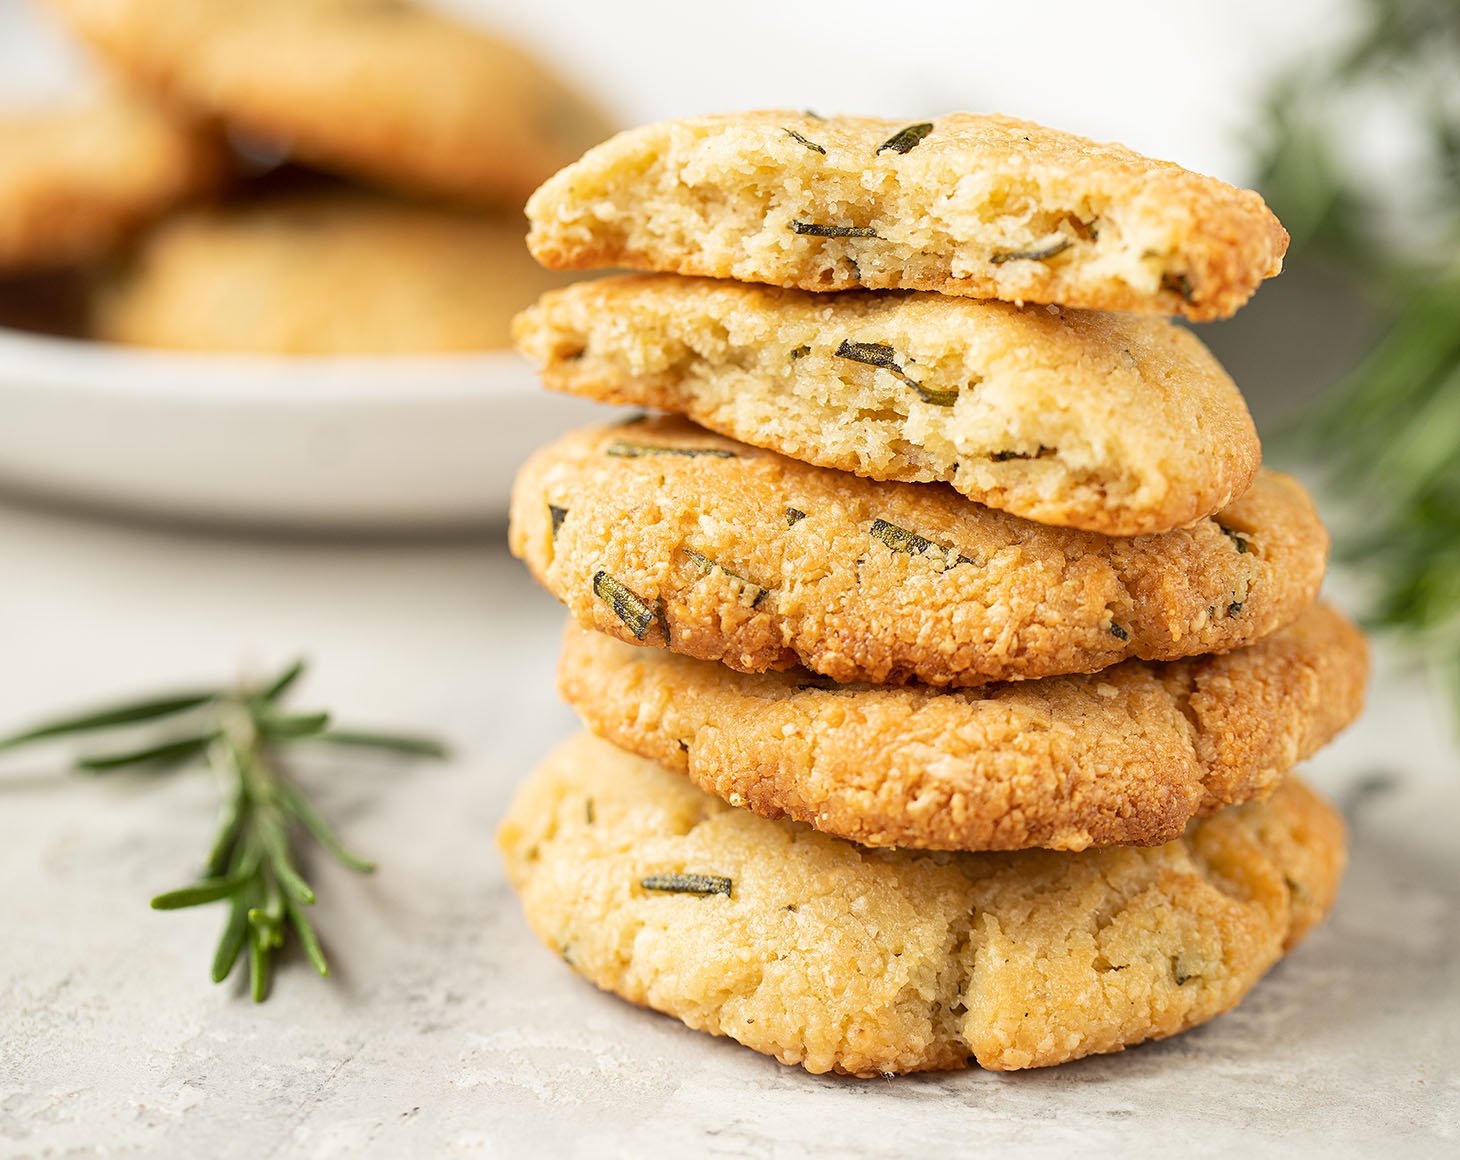 rosemary-biscuits-with-garlic-powder